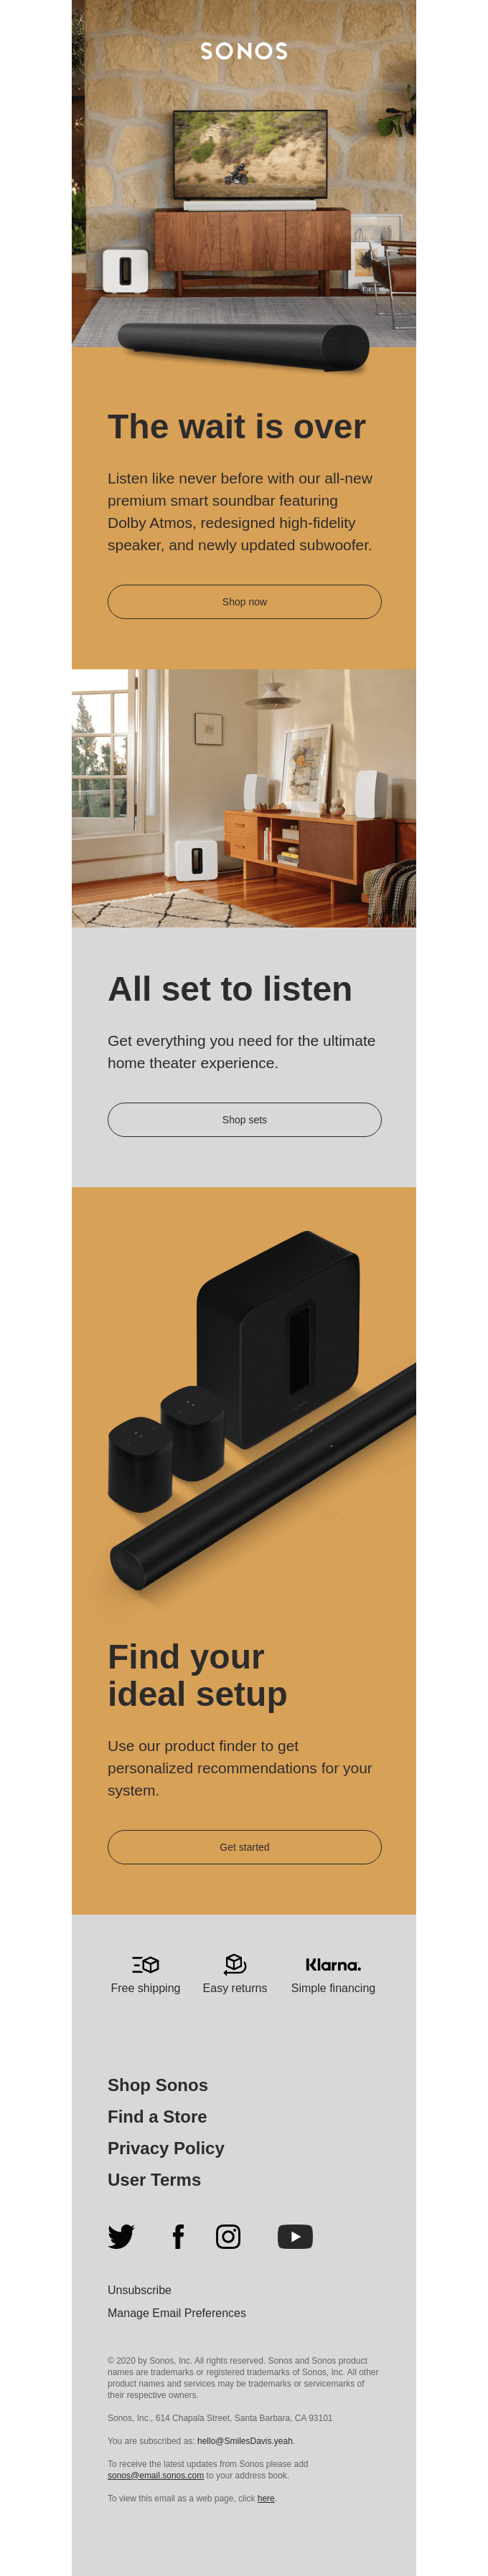 Sonos well-designed email